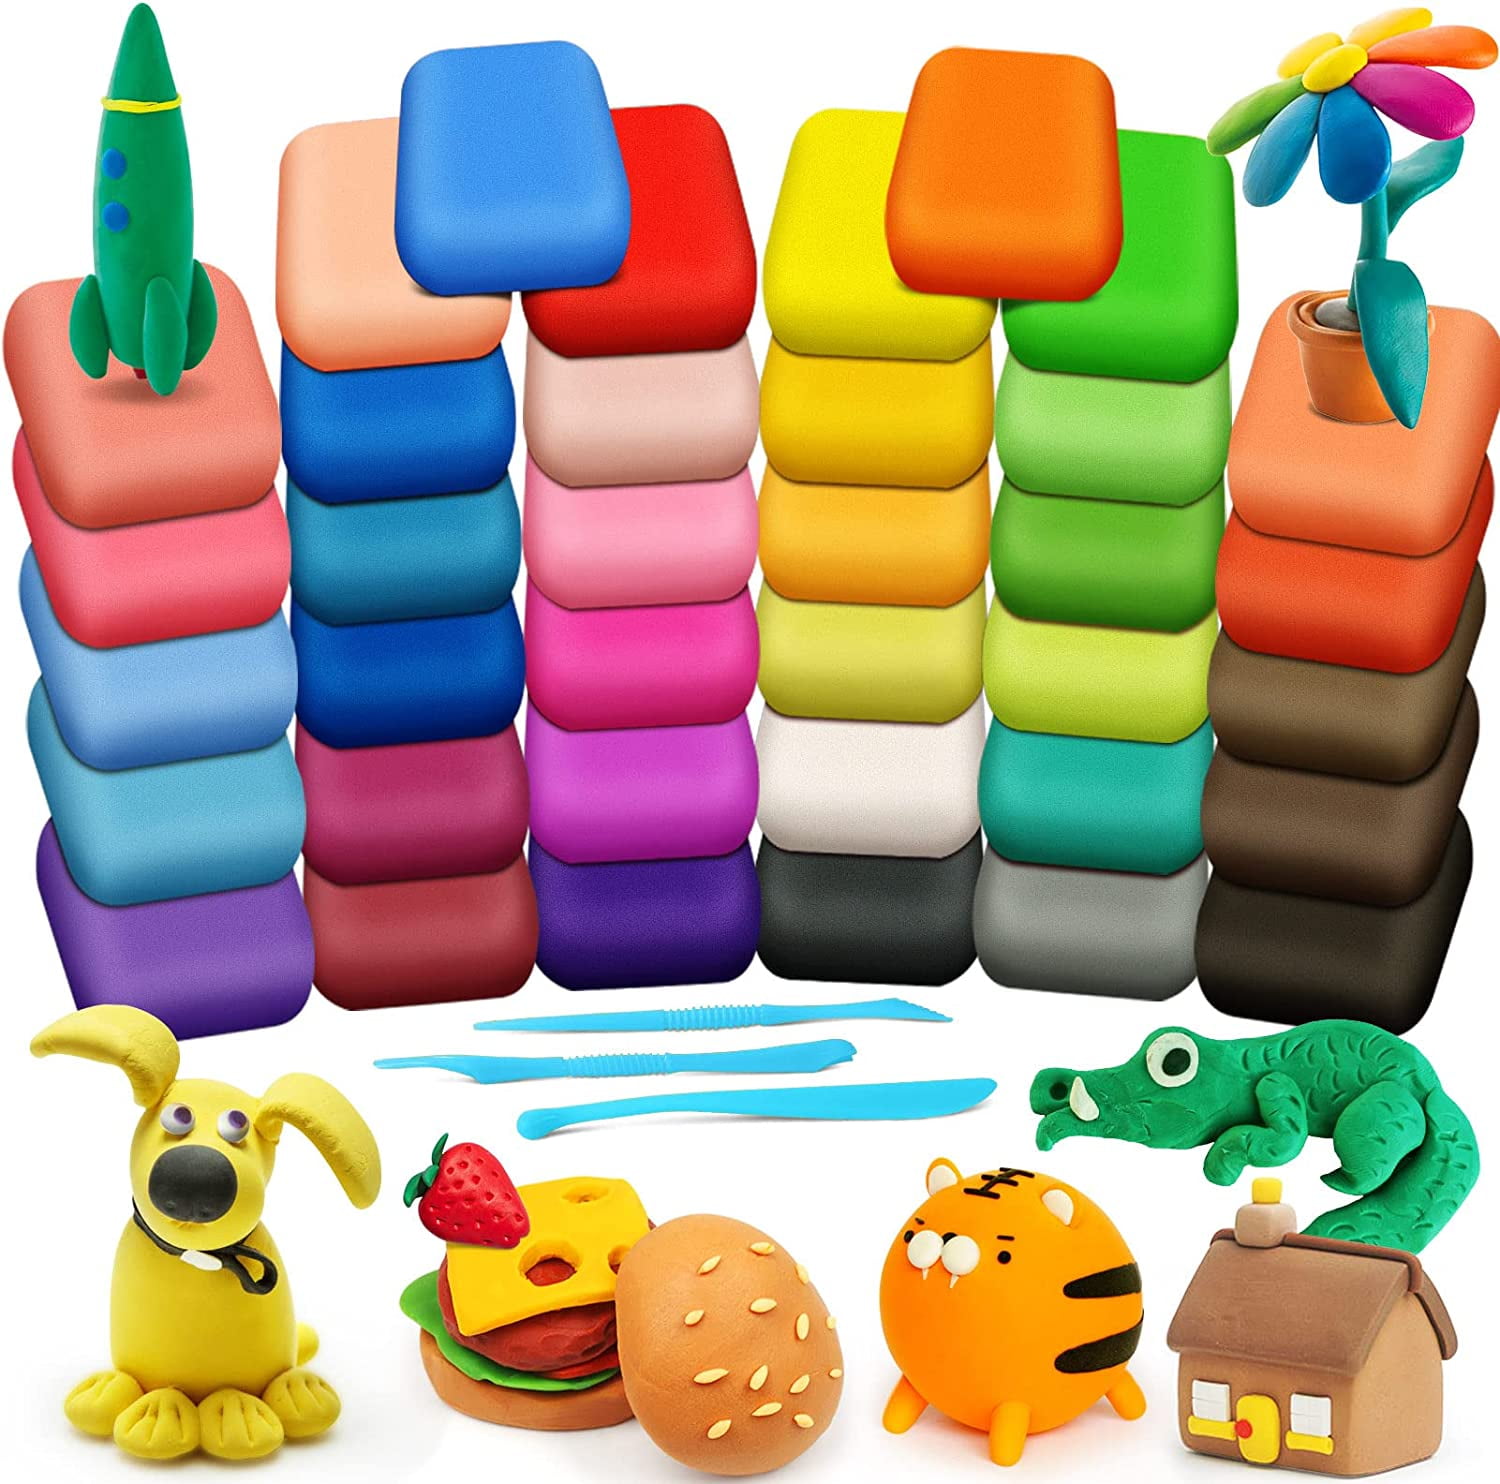 Air Dry Clay 36 Colors- Soft & Ultra Light Modeling Magical Clay for Kids,  No Bake Clay with Tools, Multicolor 